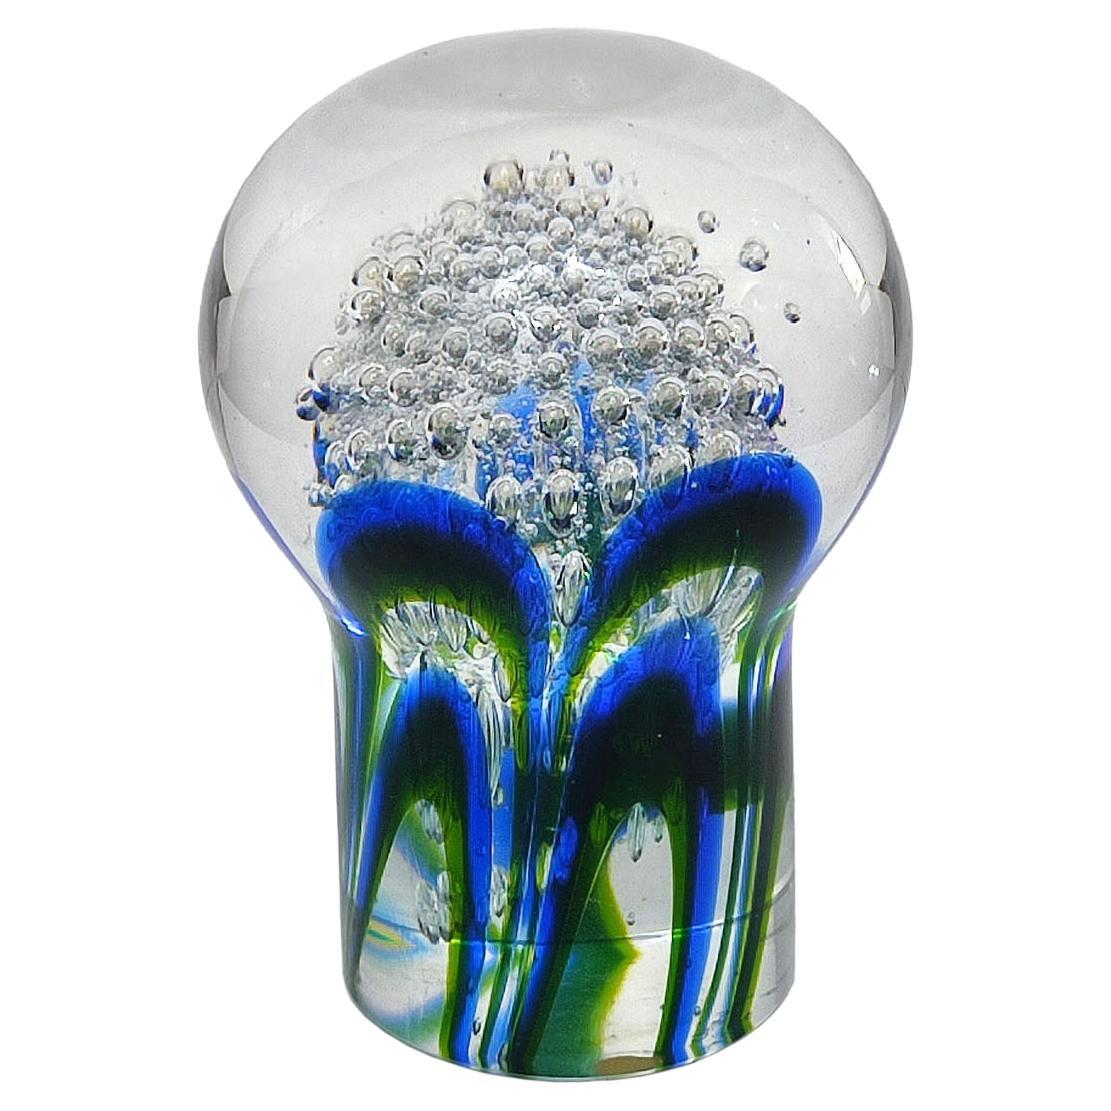 Glass Paperweight by Goran Warff for Kosta Boda, Rare Find - FREE SHIPPING For Sale